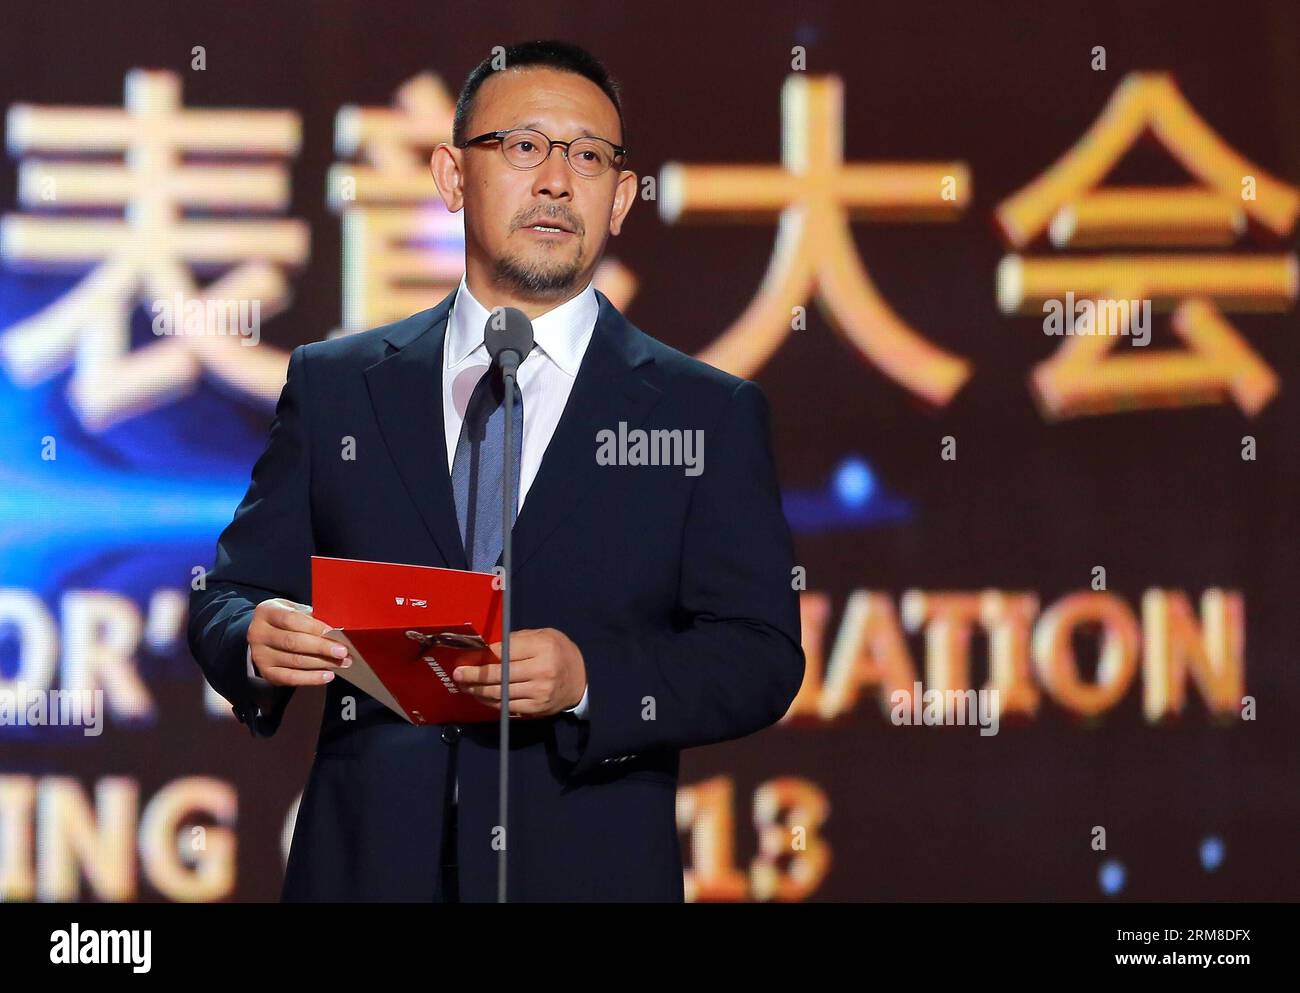 Director Jiang Wen gives awards at the 2013 annual commendation conference of China Film Directors Guild in Beijing, capital of China, April 9, 2014. (Xinhua) (zwy) CHINA-BEIJING-COMMENDATION CONFERENCE-CHINA FILM DIRECTORS GUILD(CN) PUBLICATIONxNOTxINxCHN   Director Jiang Wen Gives Awards AT The 2013 Annual  Conference of China Film Directors Guild in Beijing Capital of China April 9 2014 XINHUA  China Beijing  Conference China Film Directors Guild CN PUBLICATIONxNOTxINxCHN Stock Photo